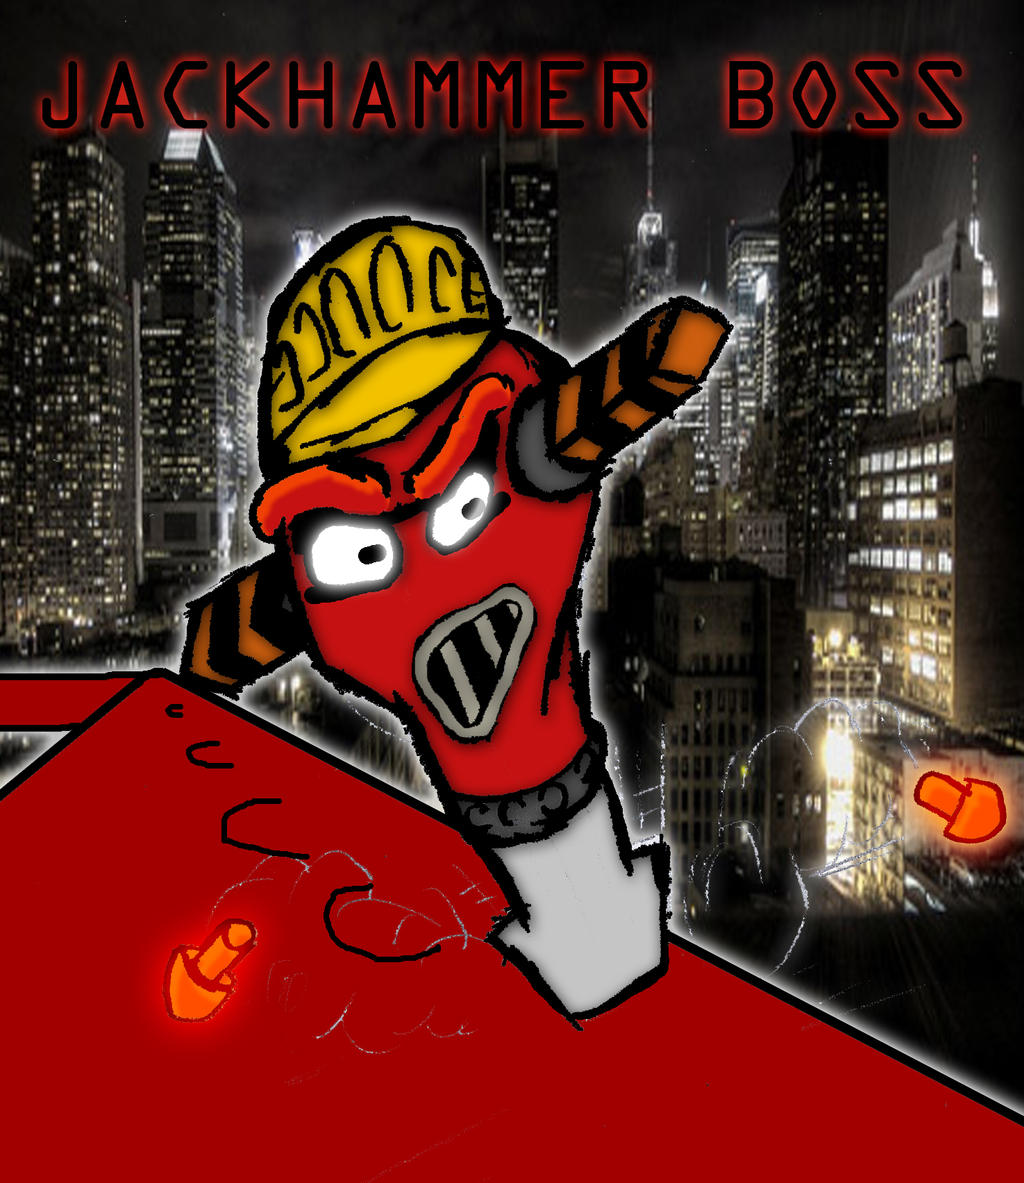 Jackhammer Boss (Toy Story 2 Video Game) by Crisis-Comics on DeviantArt